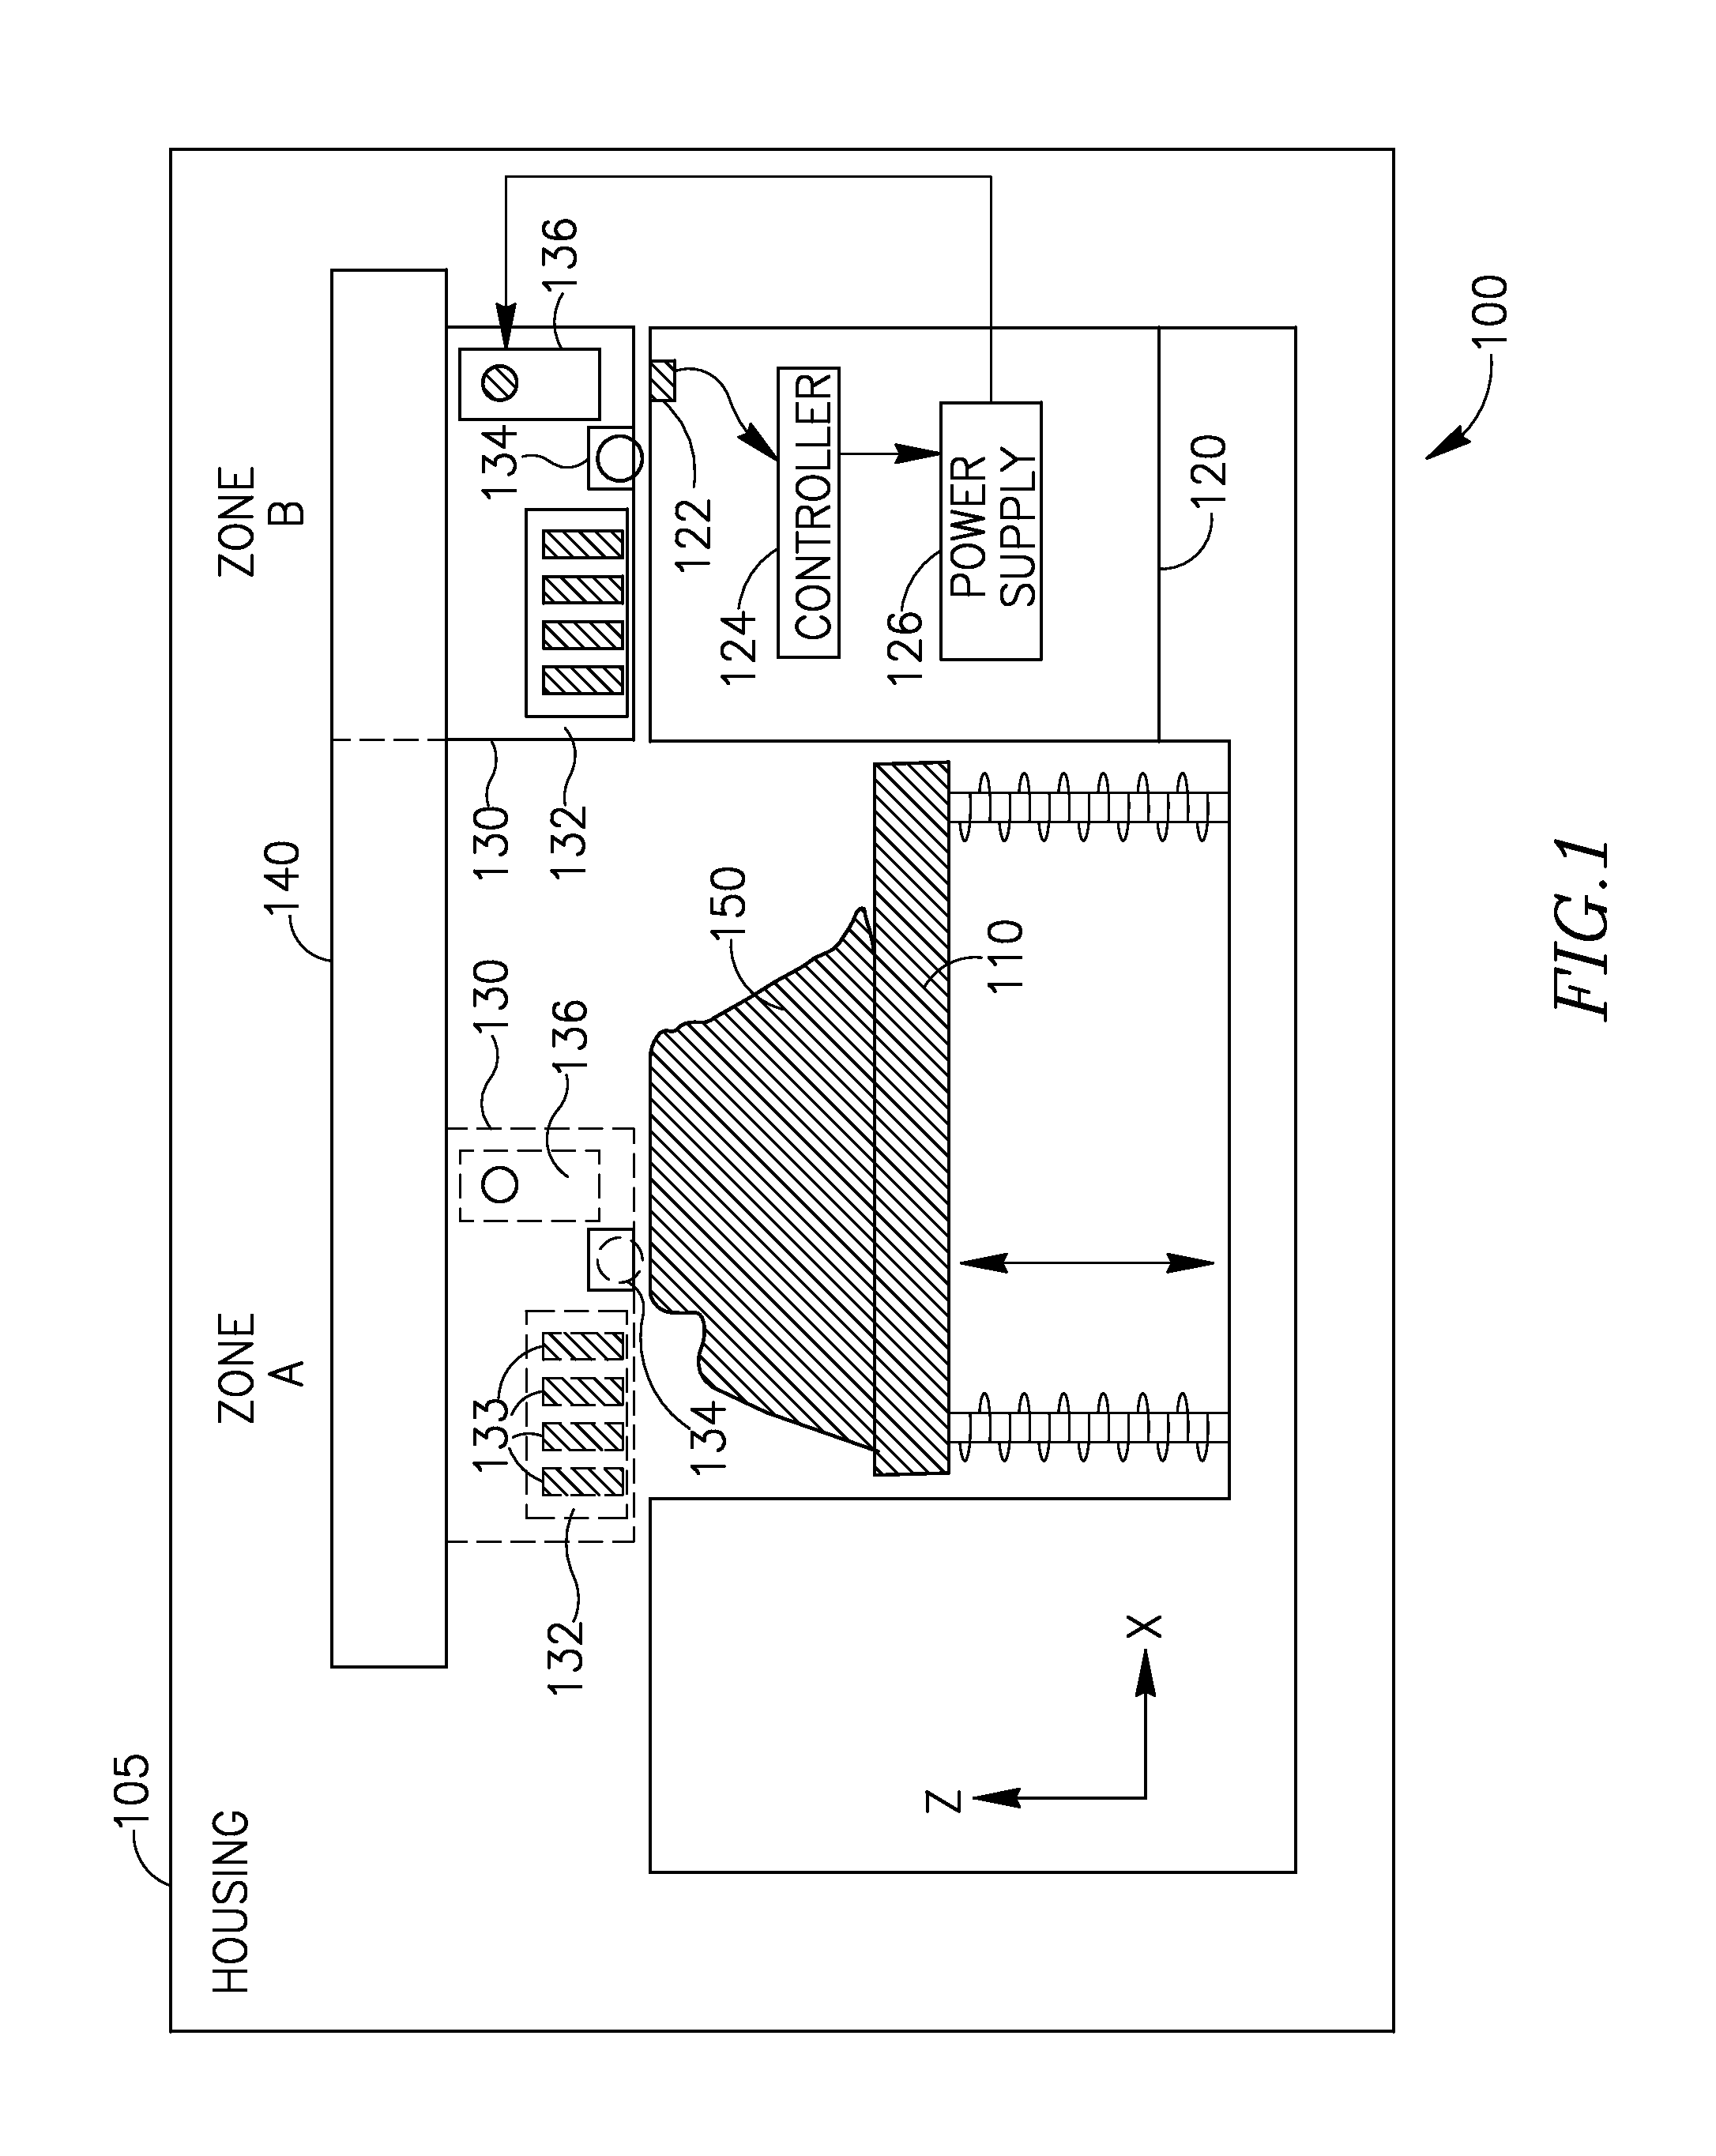 Method and apparatus for monitoring electro-magnetic radiation power in solid freeform fabrication systems